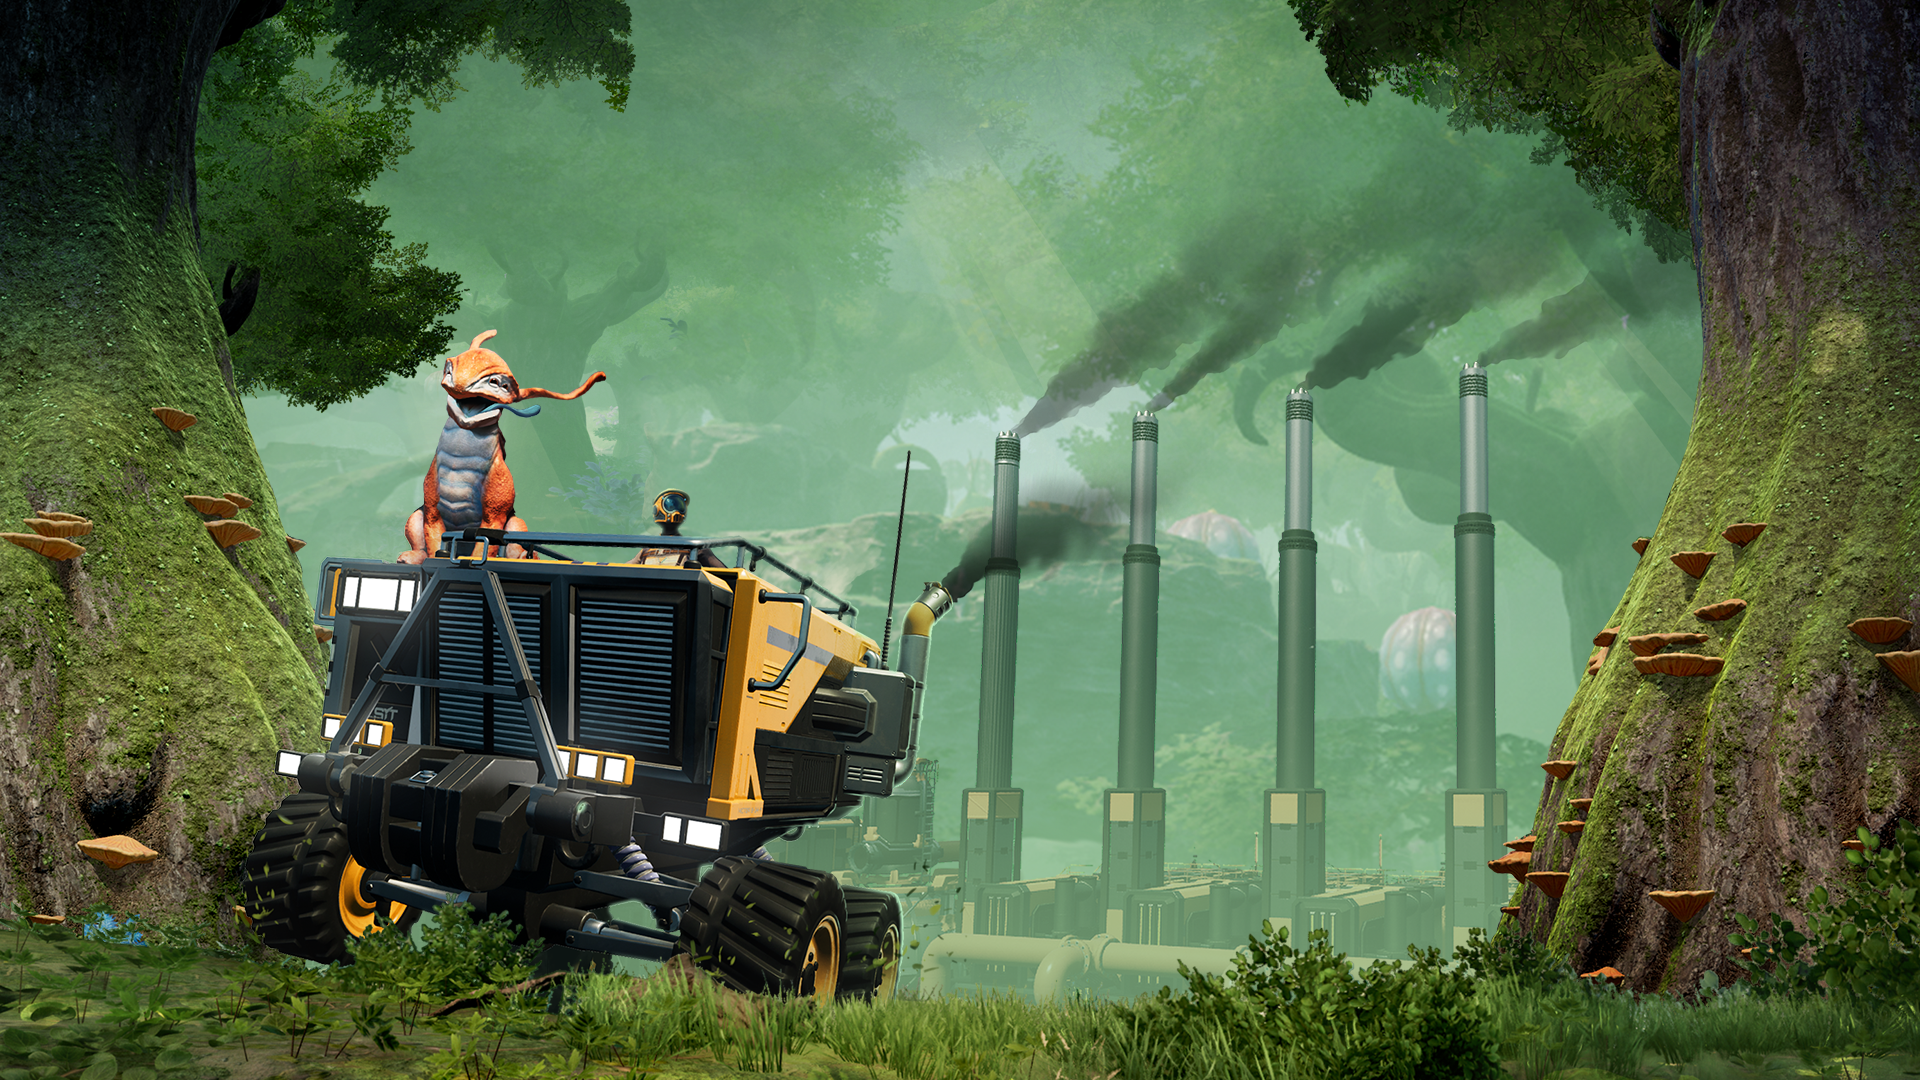 Promotional screenshot for videogame Satisfactory's 1.0 release announcement